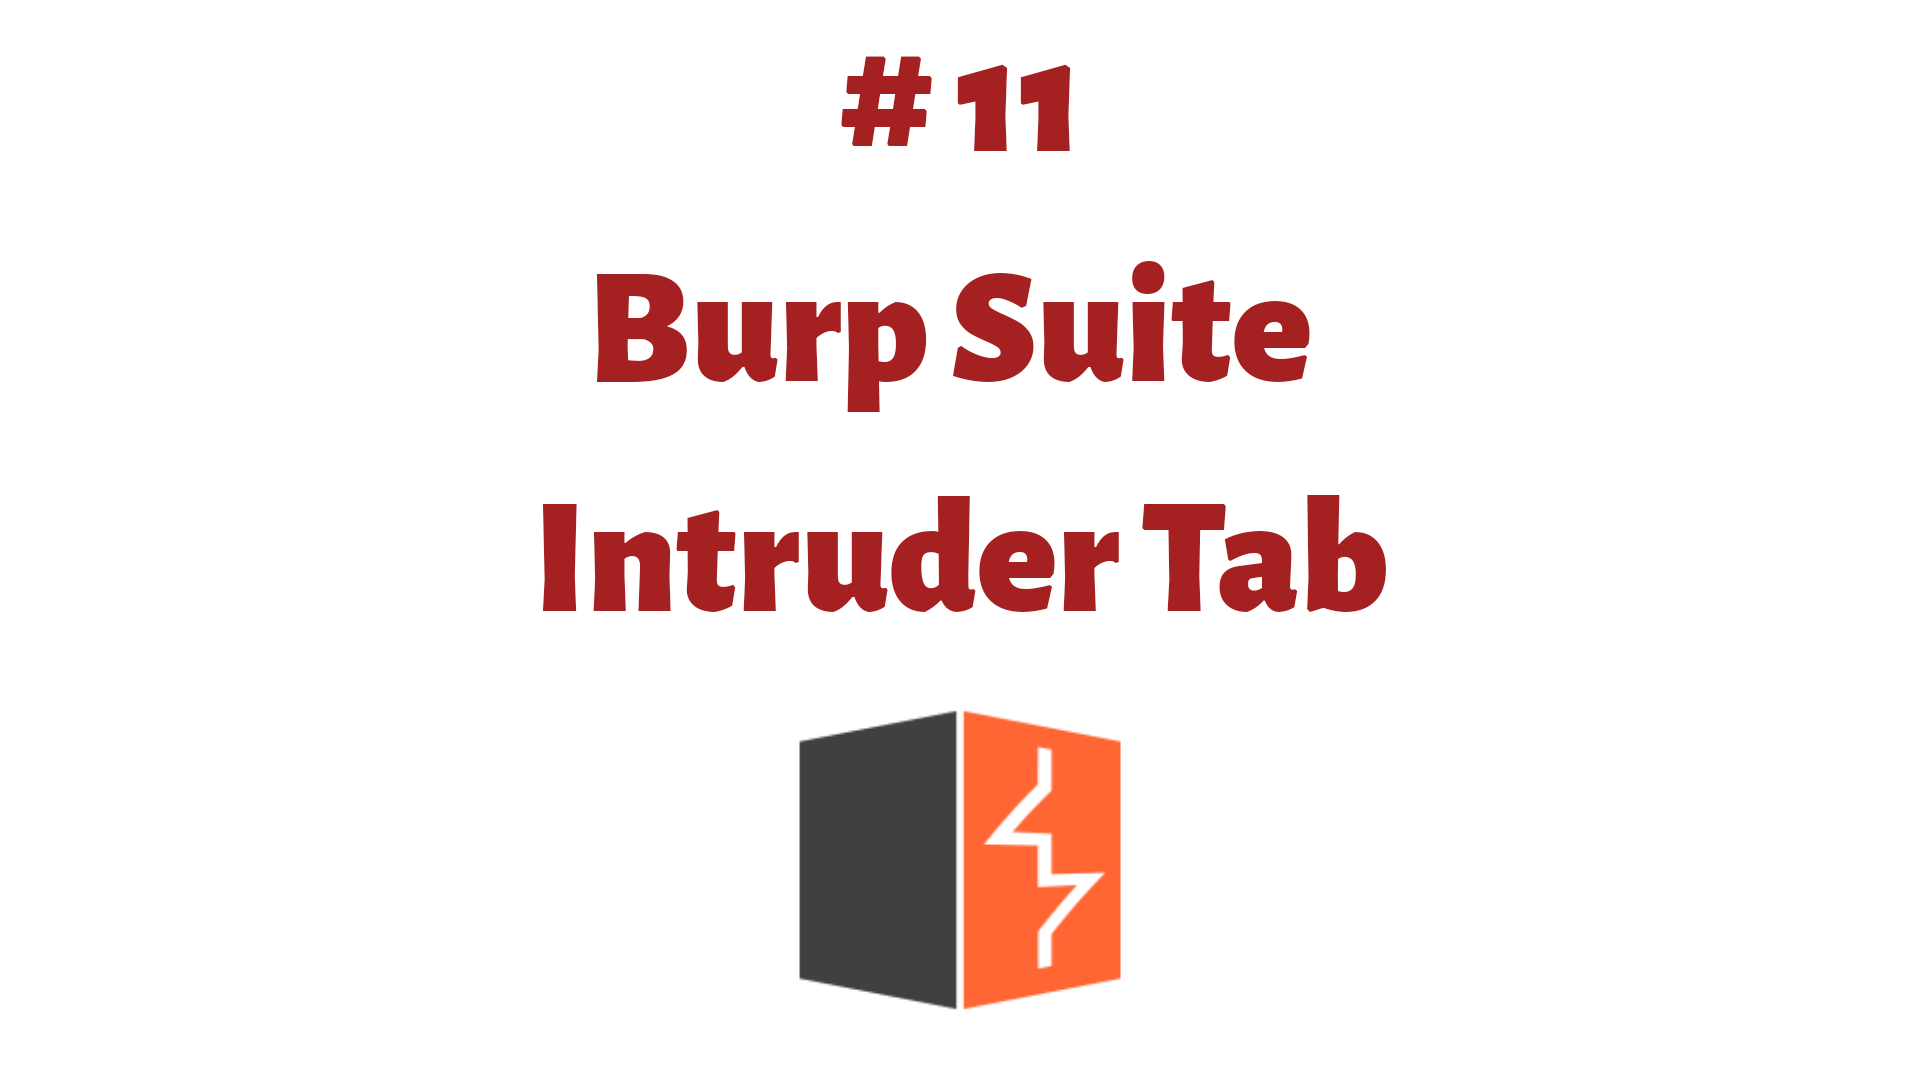 You are currently viewing Intruder Tab – Guide for Burp Suite
<span class="bsf-rt-reading-time"><span class="bsf-rt-display-label" prefix=""></span> <span class="bsf-rt-display-time" reading_time="5"></span> <span class="bsf-rt-display-postfix" postfix="min read"></span></span><!-- .bsf-rt-reading-time -->